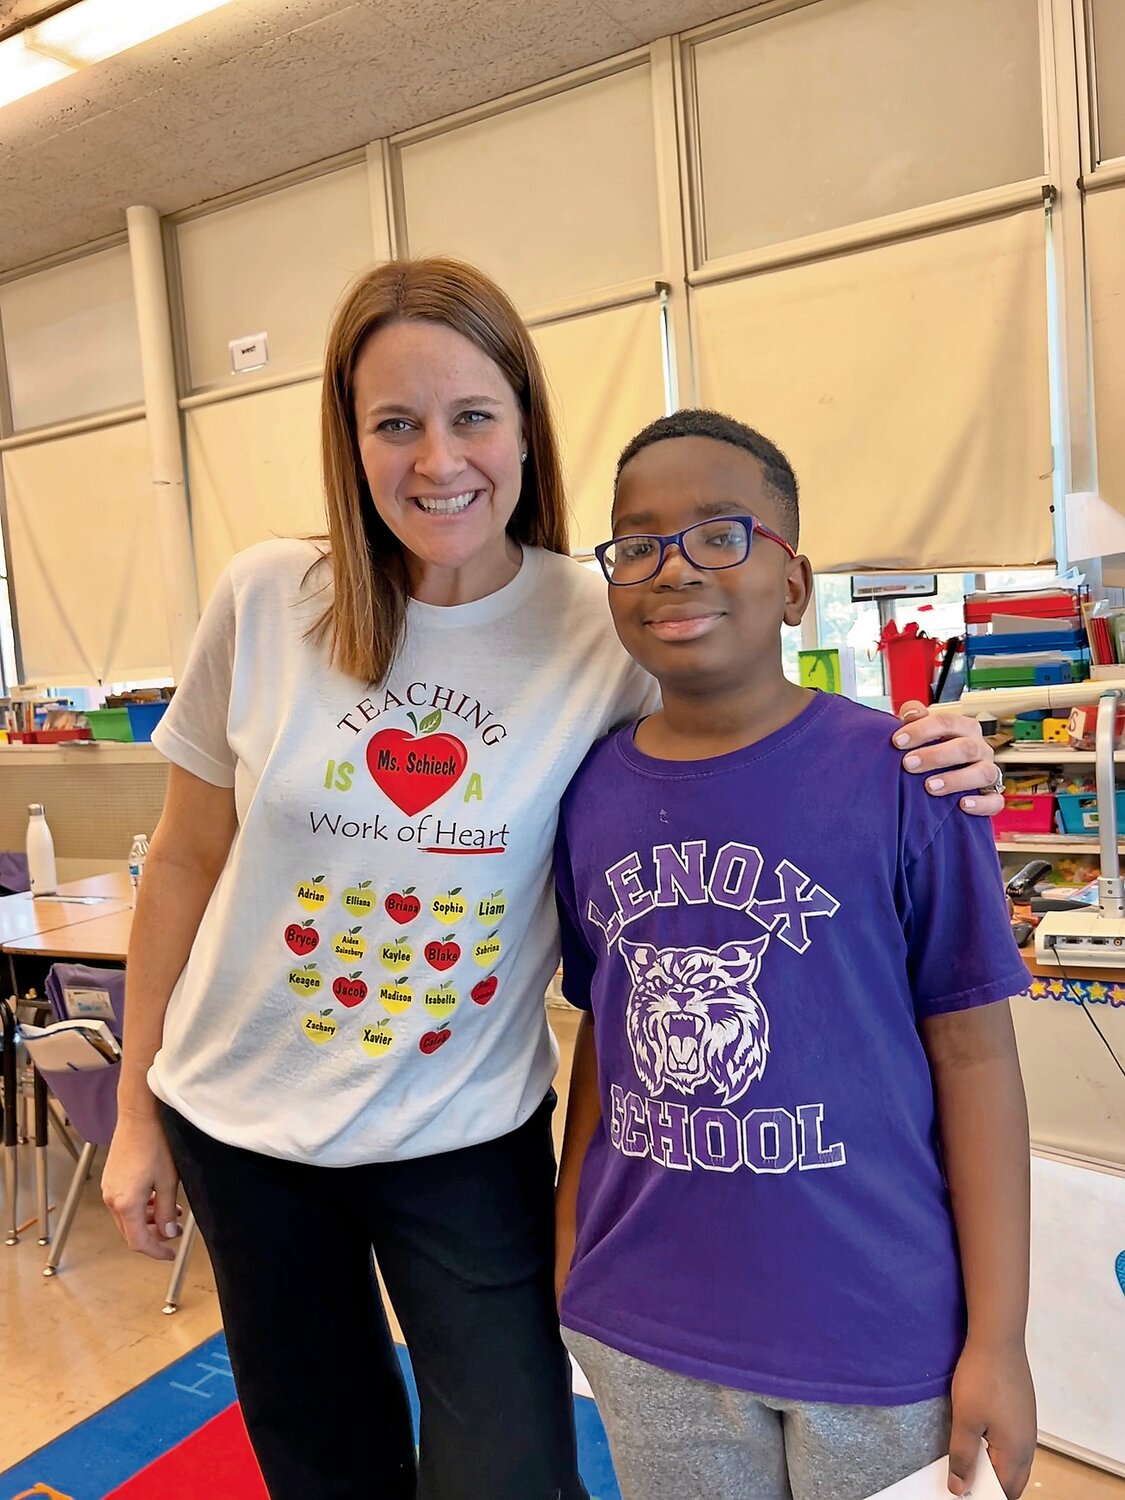 Kathleen Schieck with her student Bryce Owens after the announcement that she was one of two winners of the Applebee’s Teacher of the Year contest thanks to Bryce’s essay nominating her.